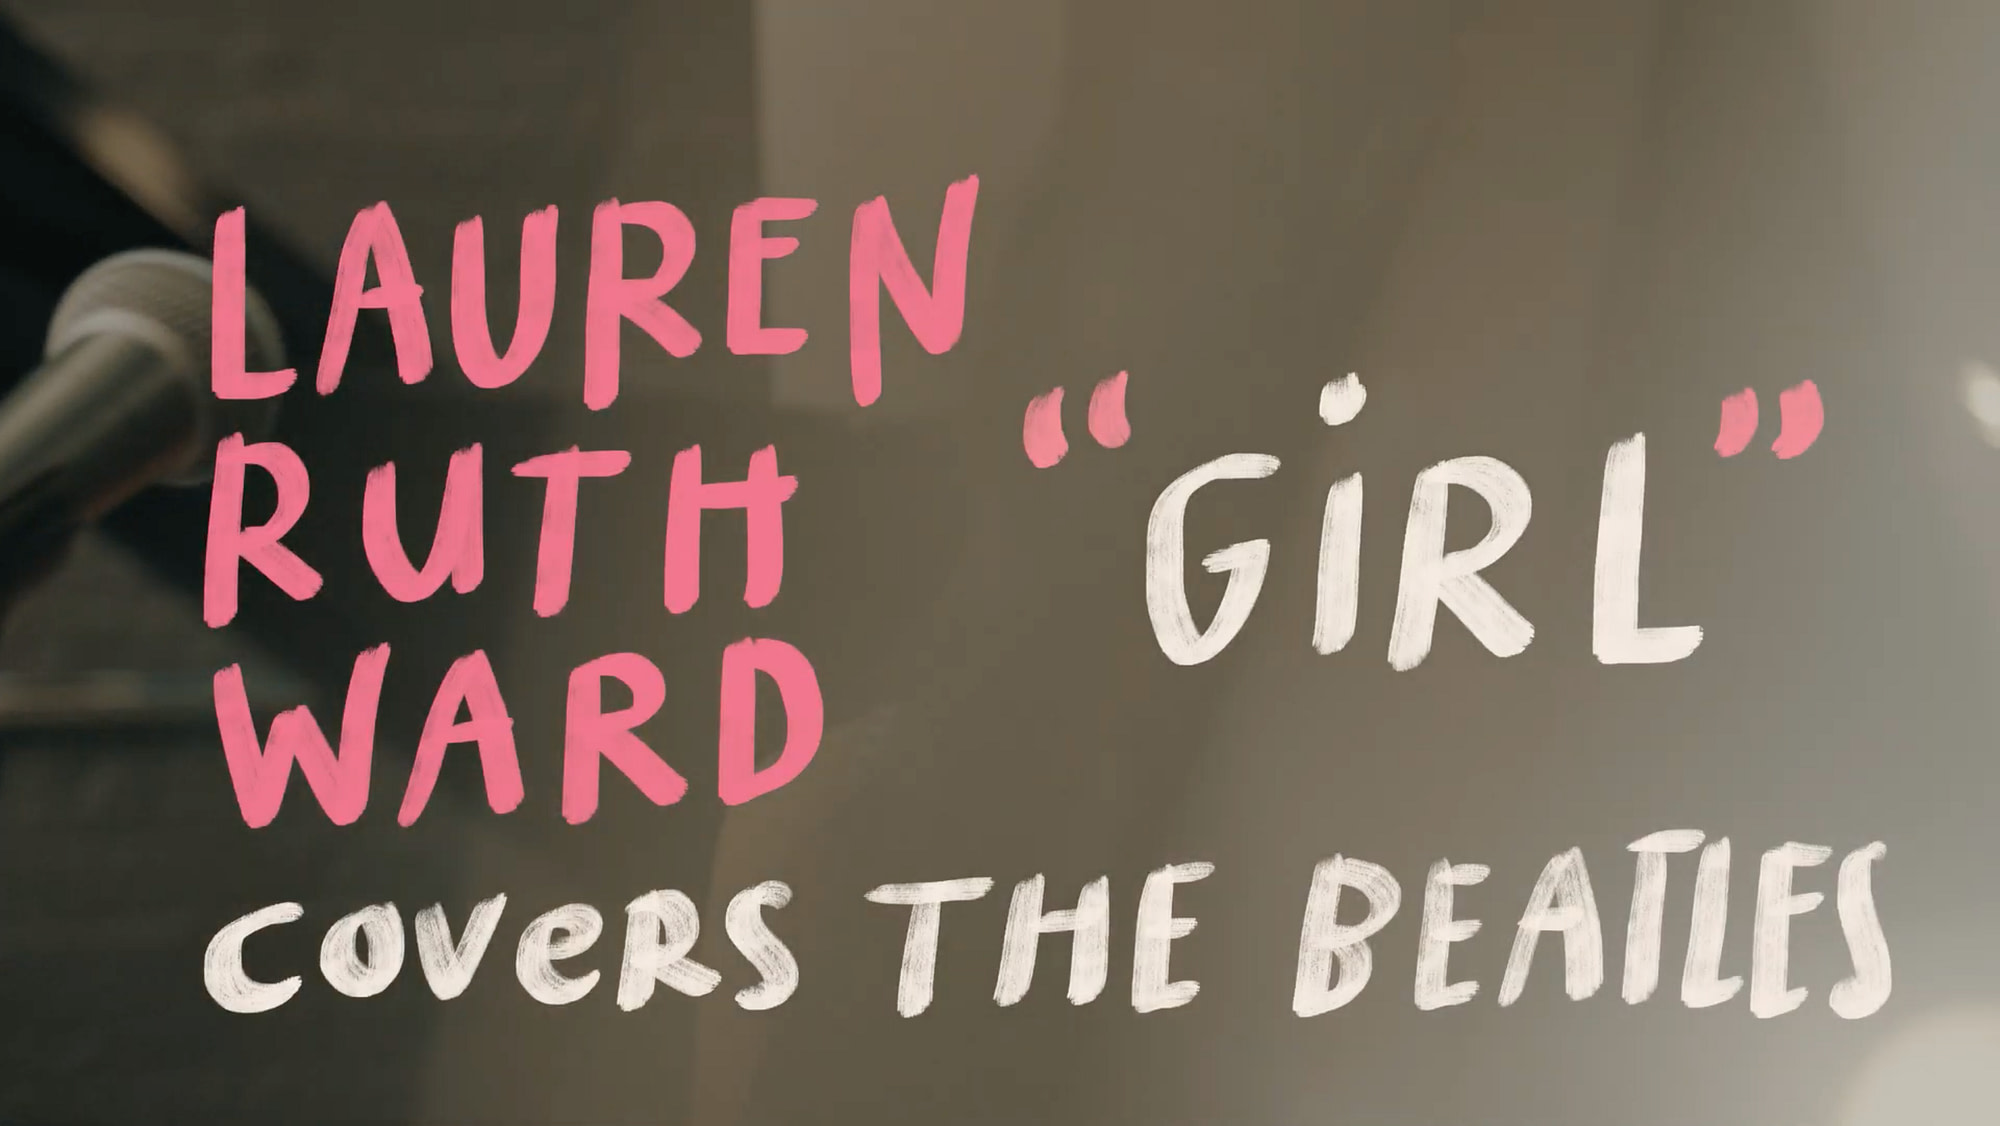 The Wild Honey Pie Buzzsession: Lauren Ruth Ward “Girl” (The Beatles cover)